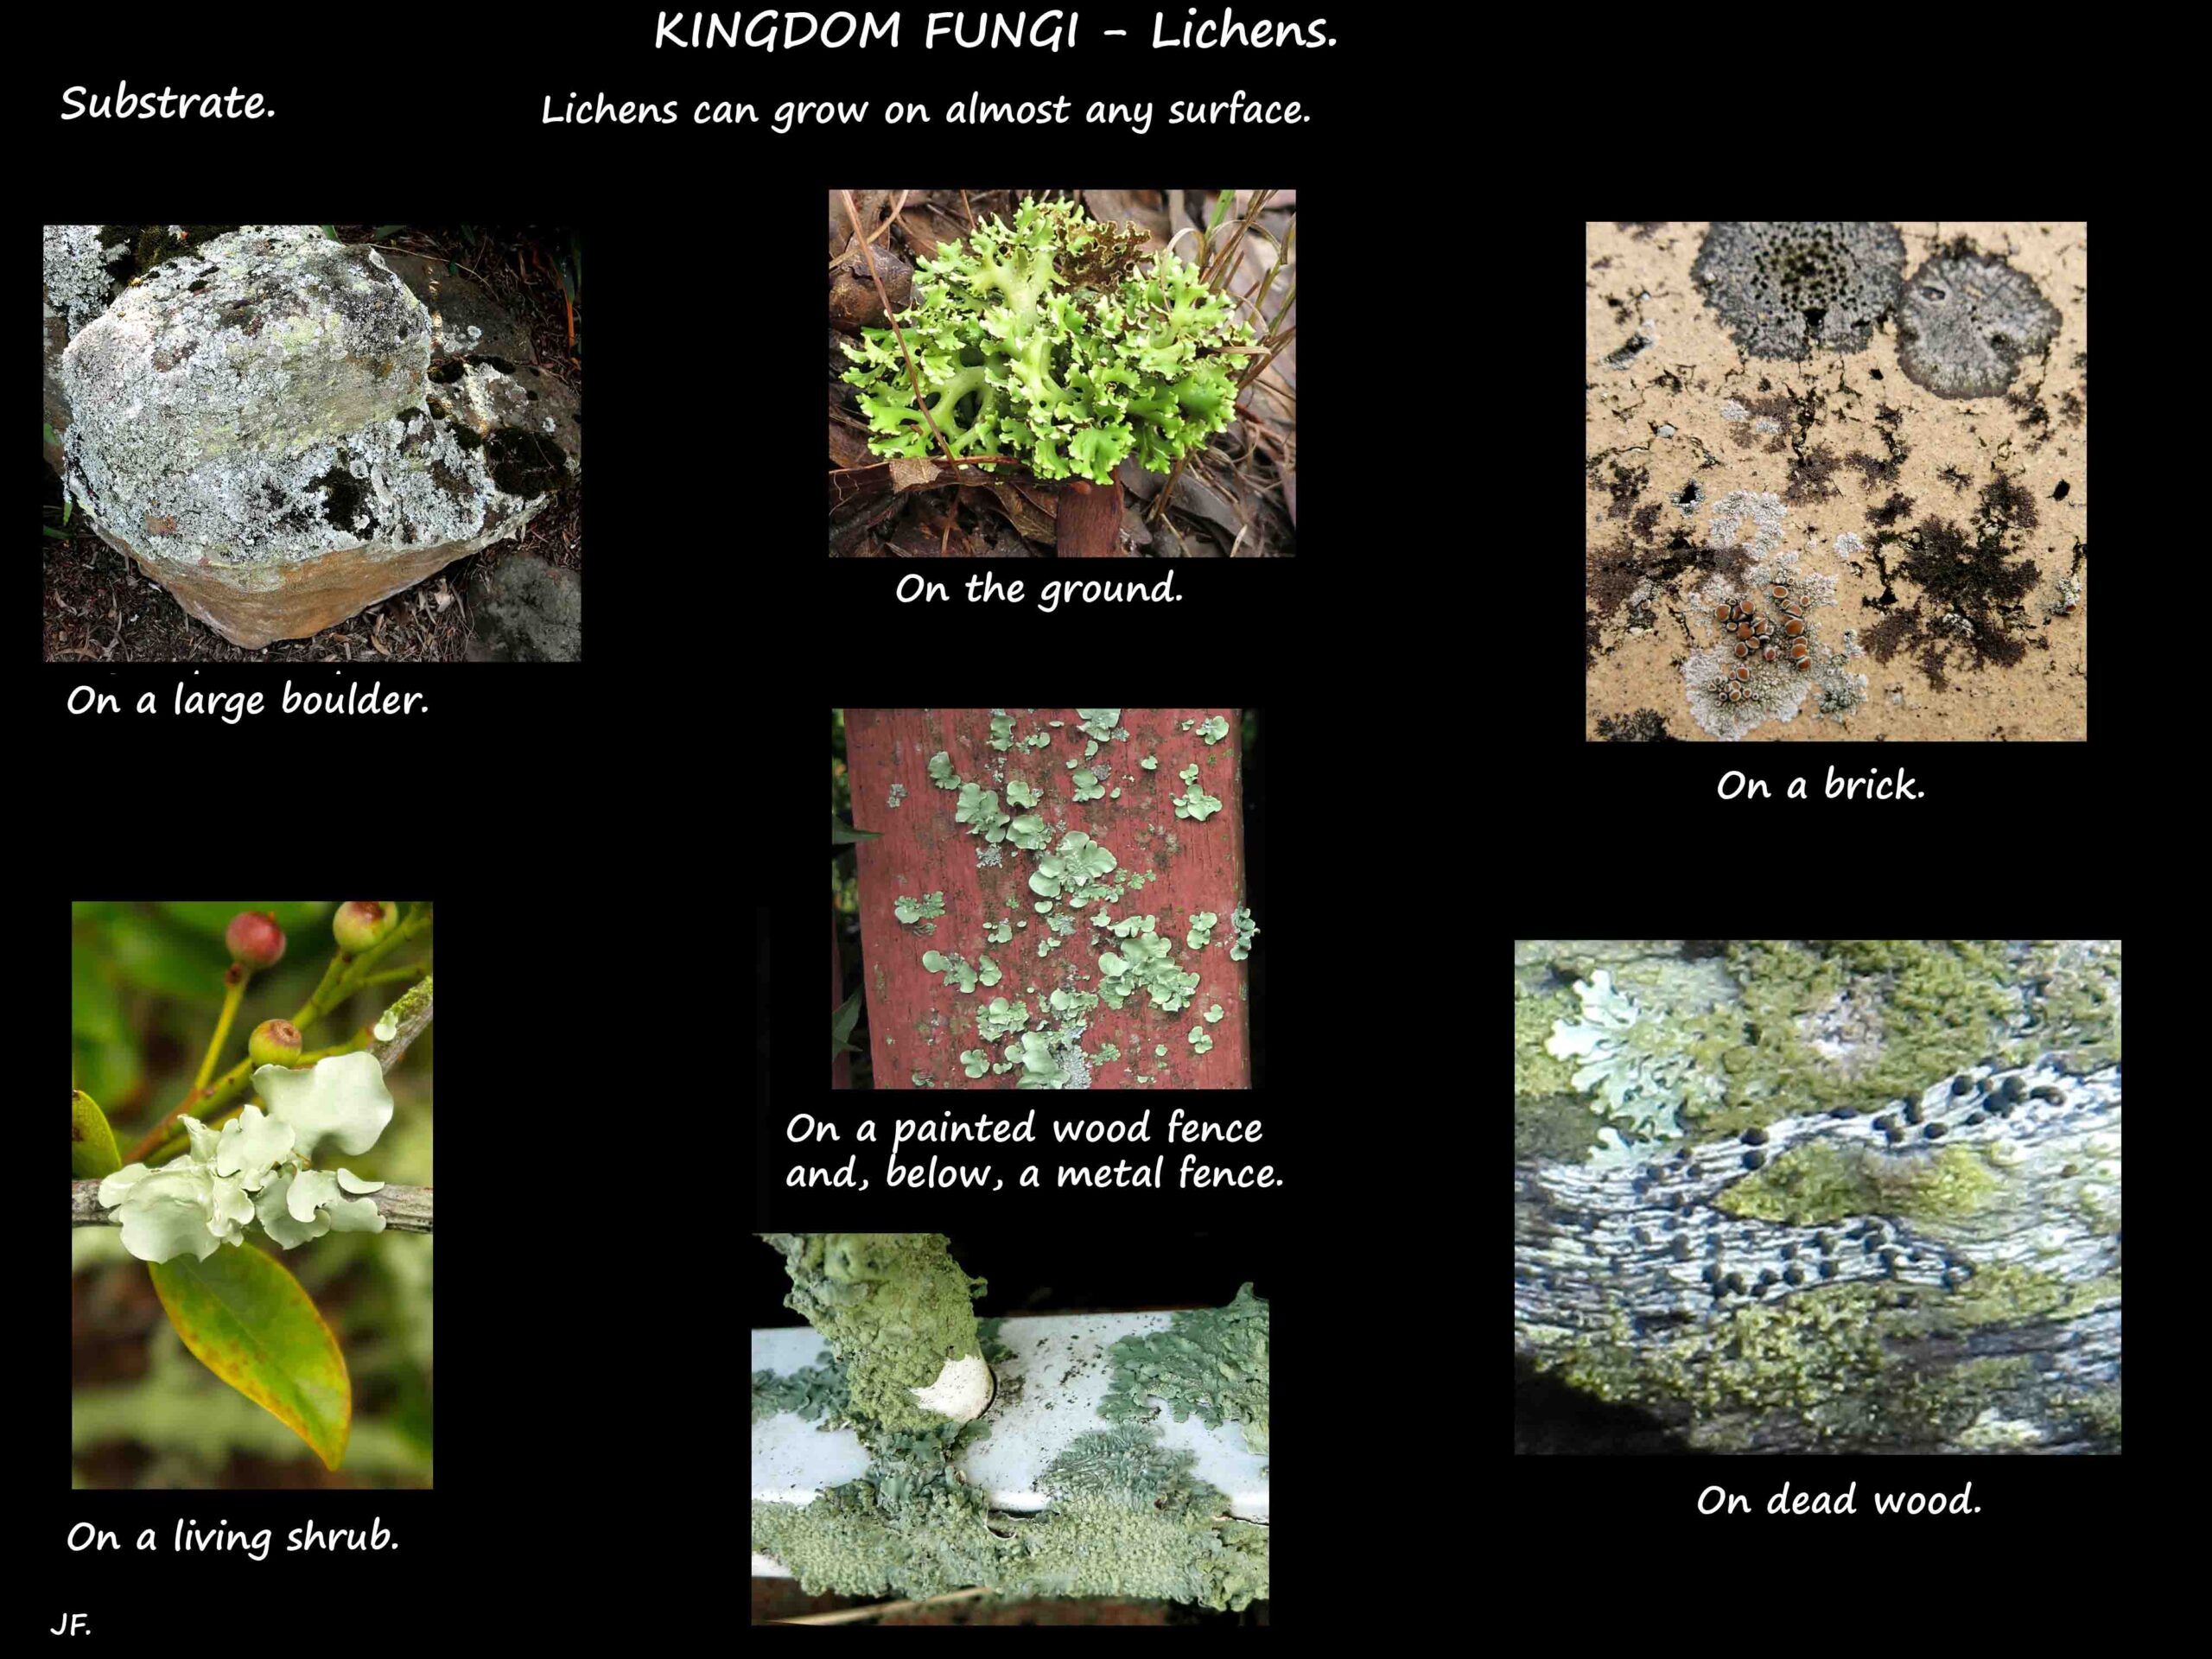 1 Lichen can grow on almost any surface